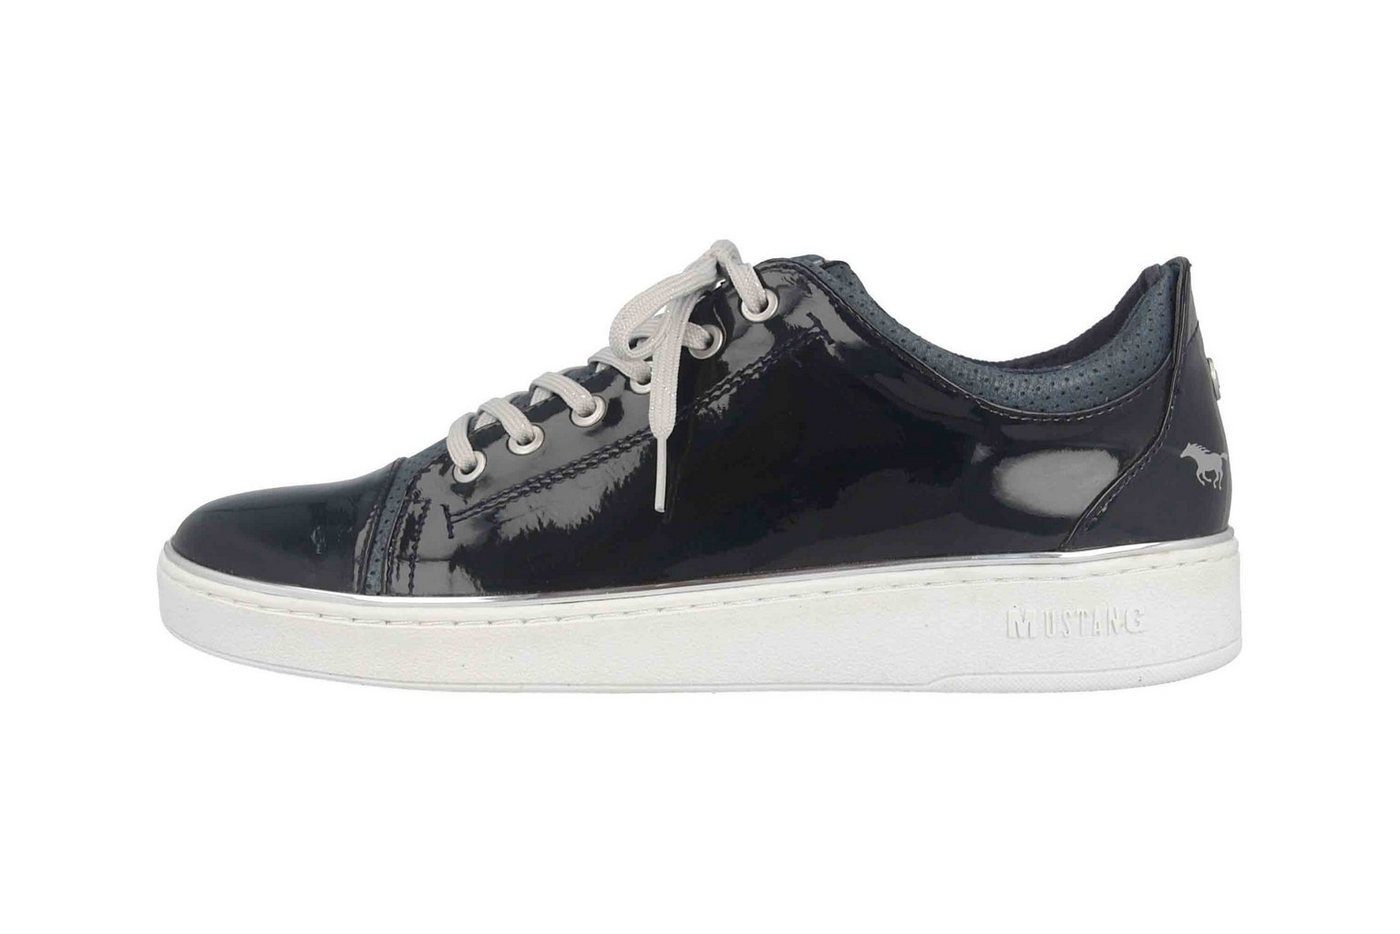 Mustang Shoes 1300-301-820 Sneaker von Mustang Shoes